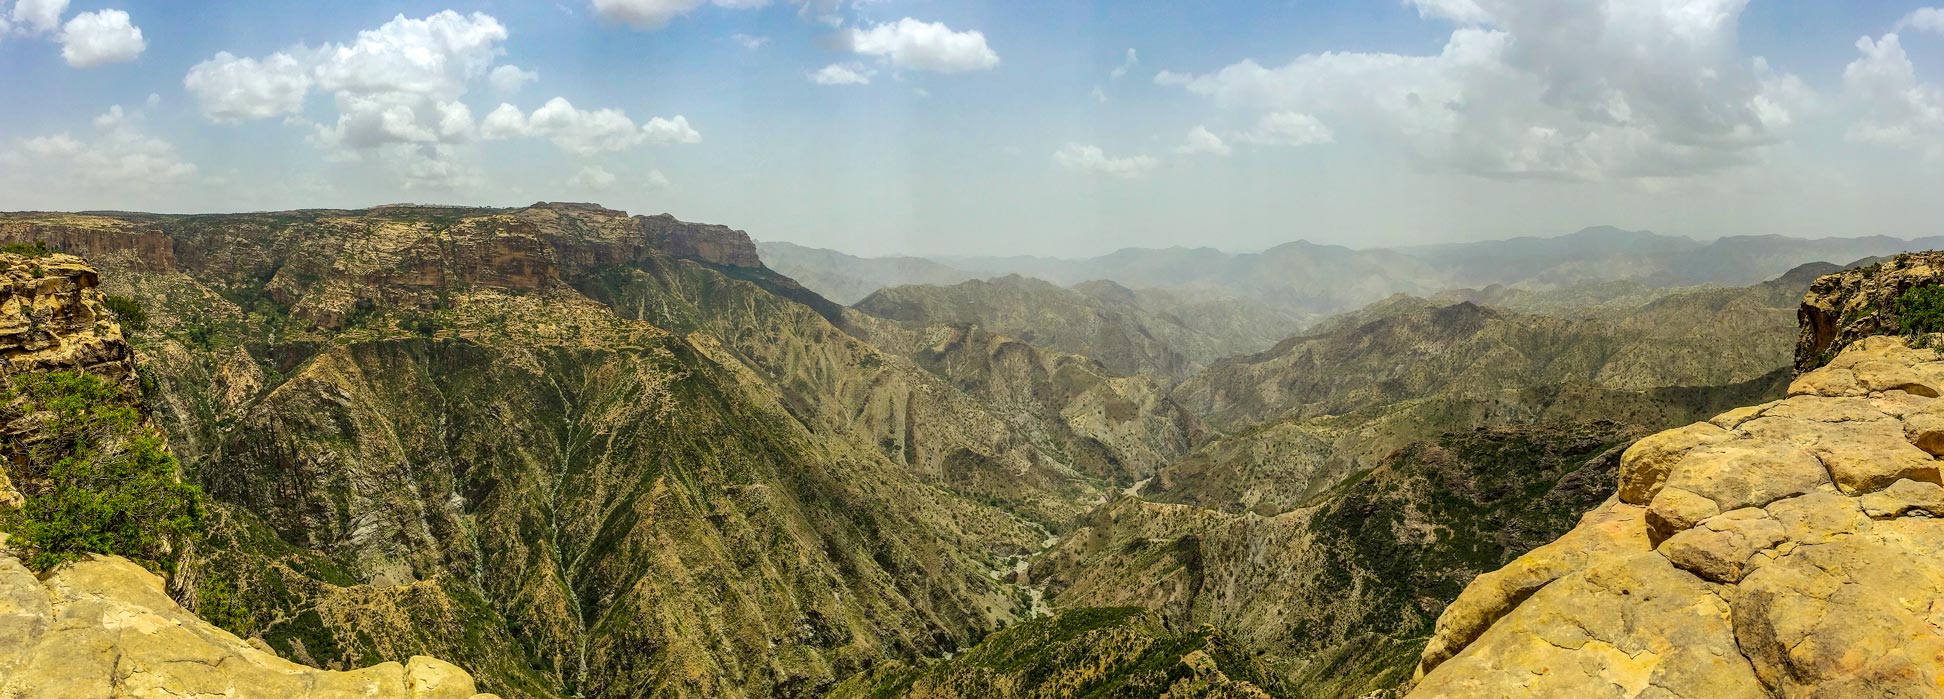 View of the Eritrean Grand Canyon